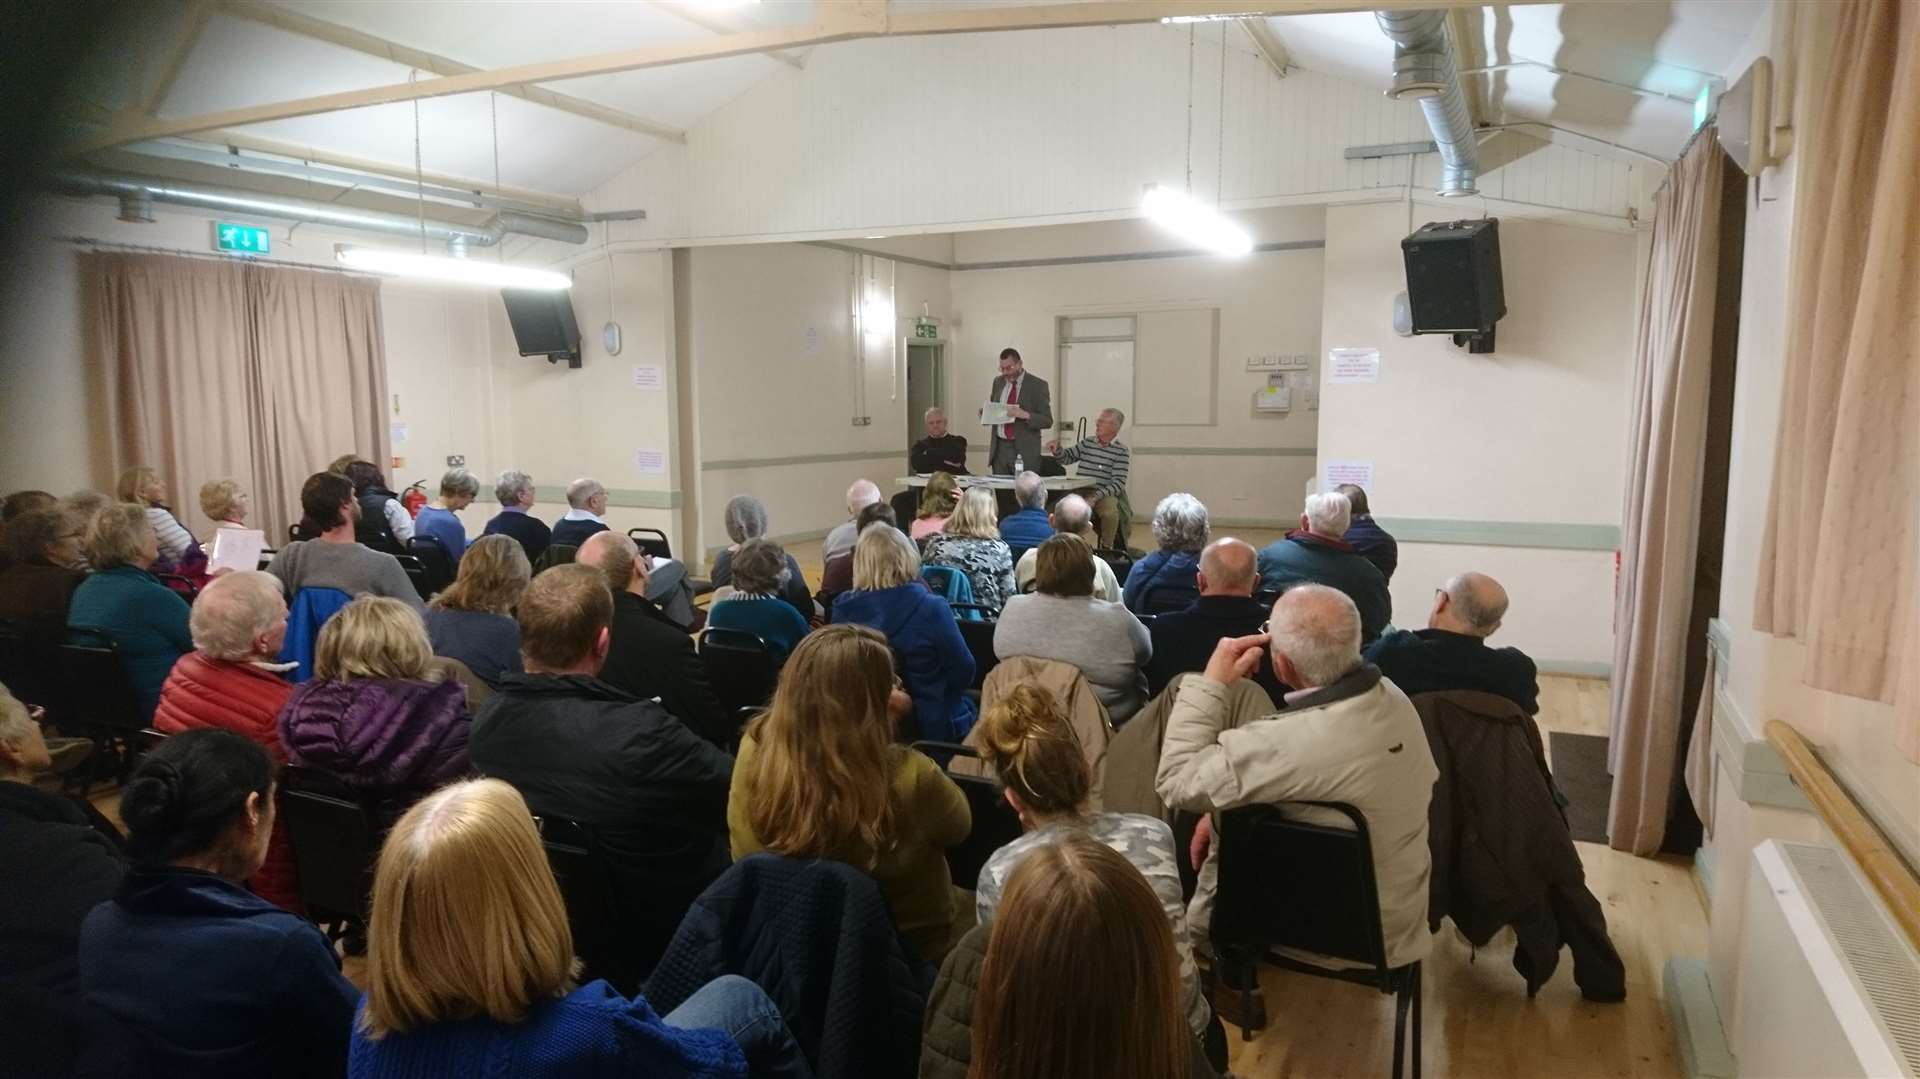 Public meeting with Fant councillors to discuss potential plans for housing. Save Fant Farm resinstated. (28158973)